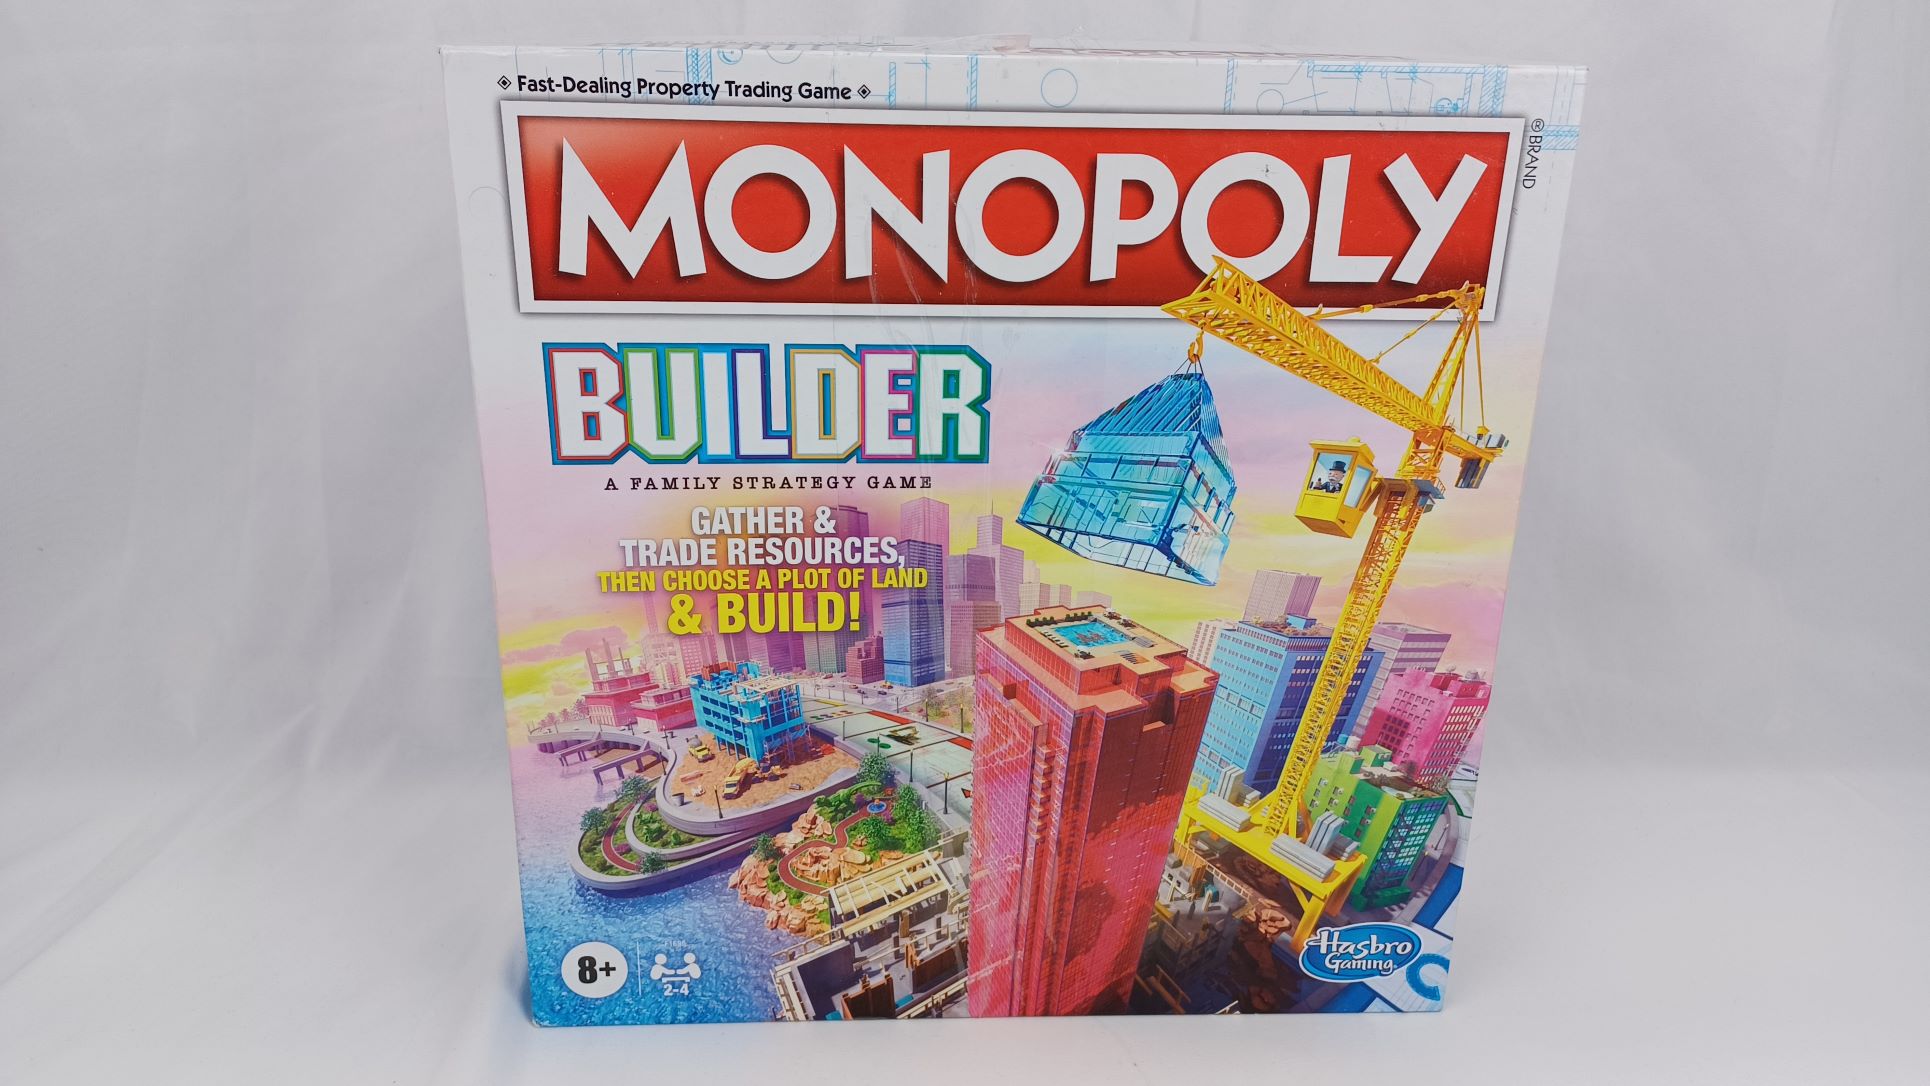 Box for Monopoly Builder